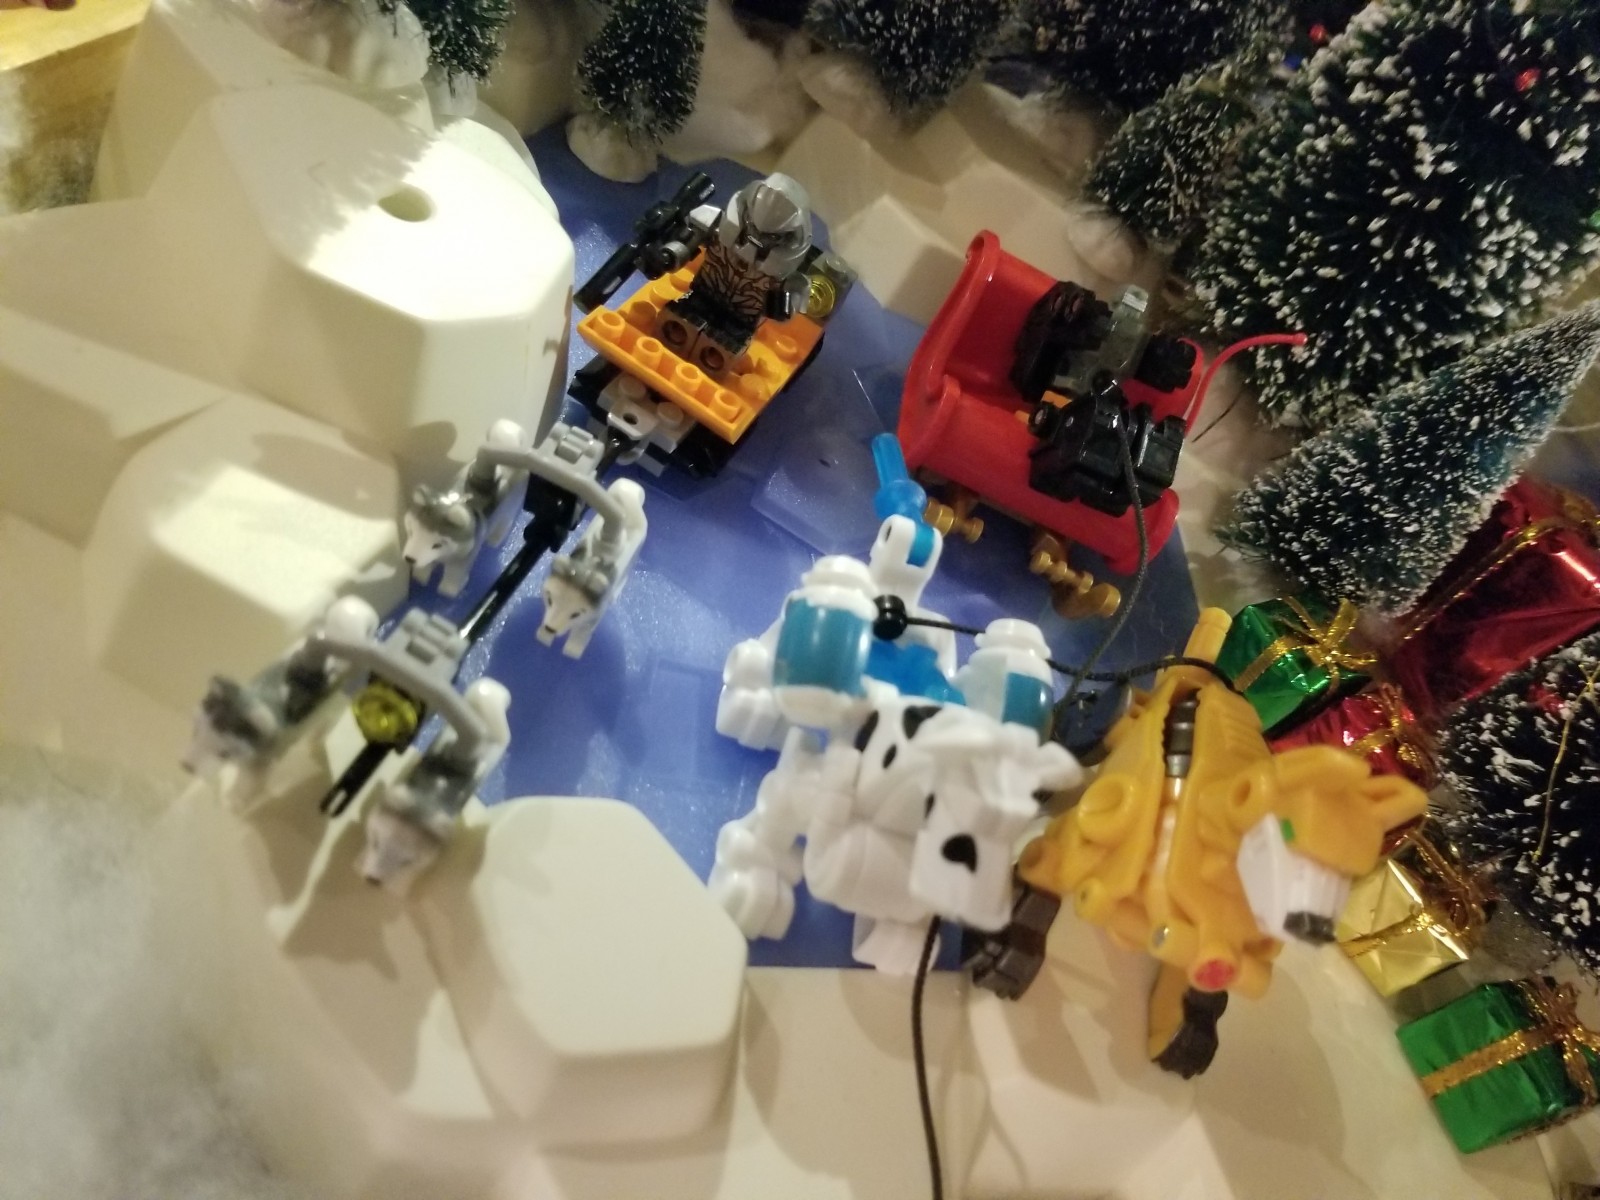 Transformers News: Re: Transformersmas 2017: A 25 Day Holiday Photo Challenge